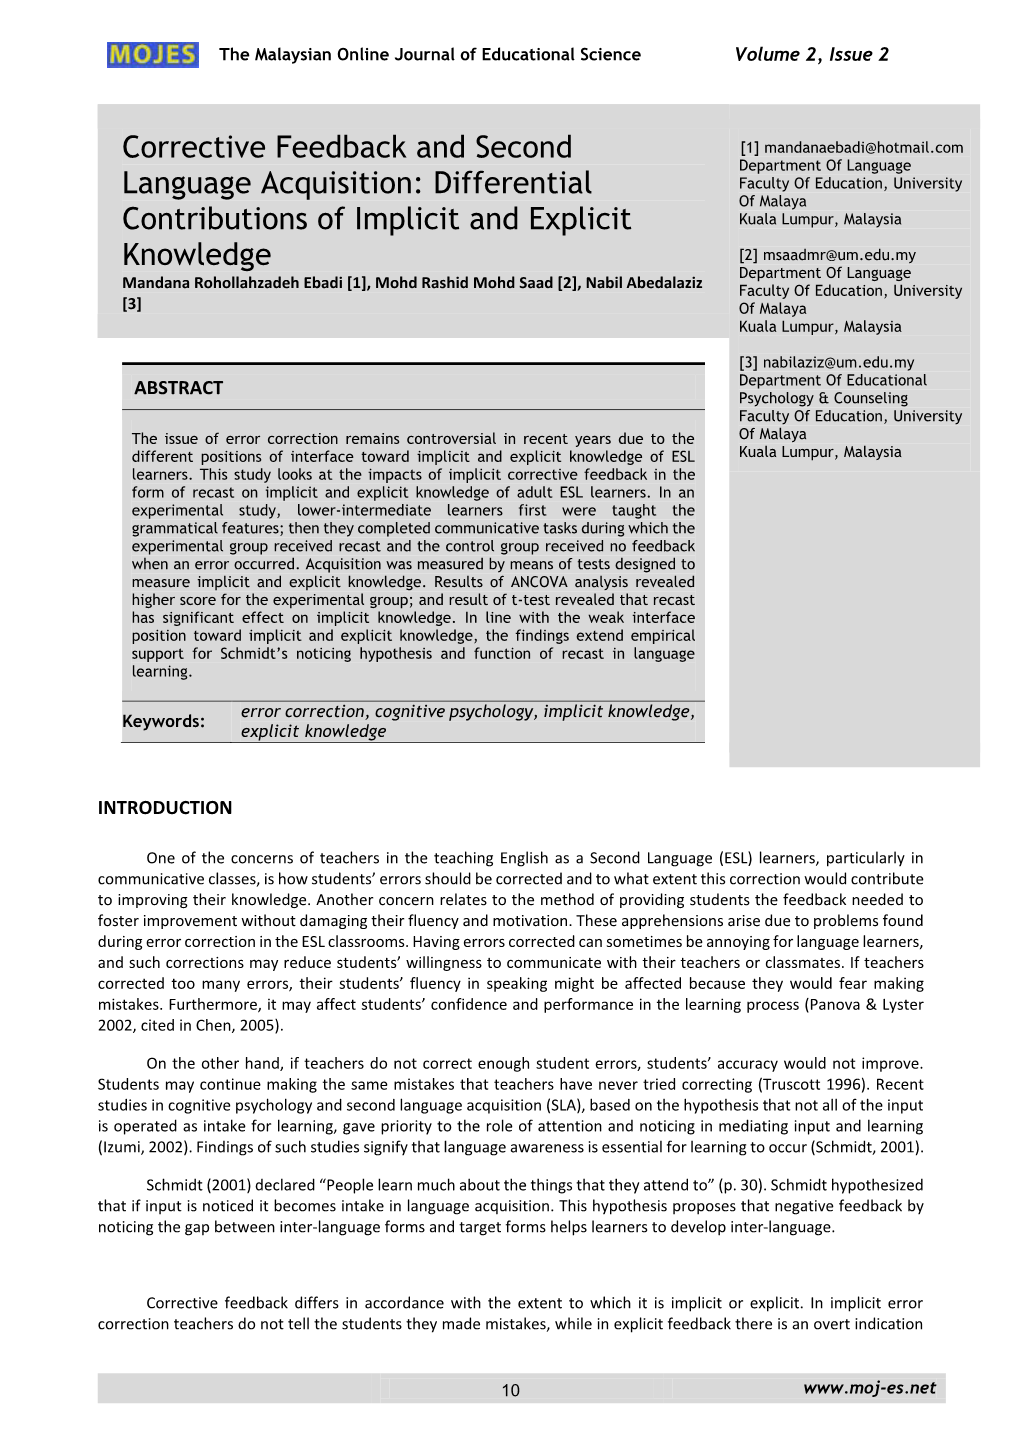 Corrective Feedback and Second Language Acquisition: Differential Contributions of Implicit and Explicit Knowledge